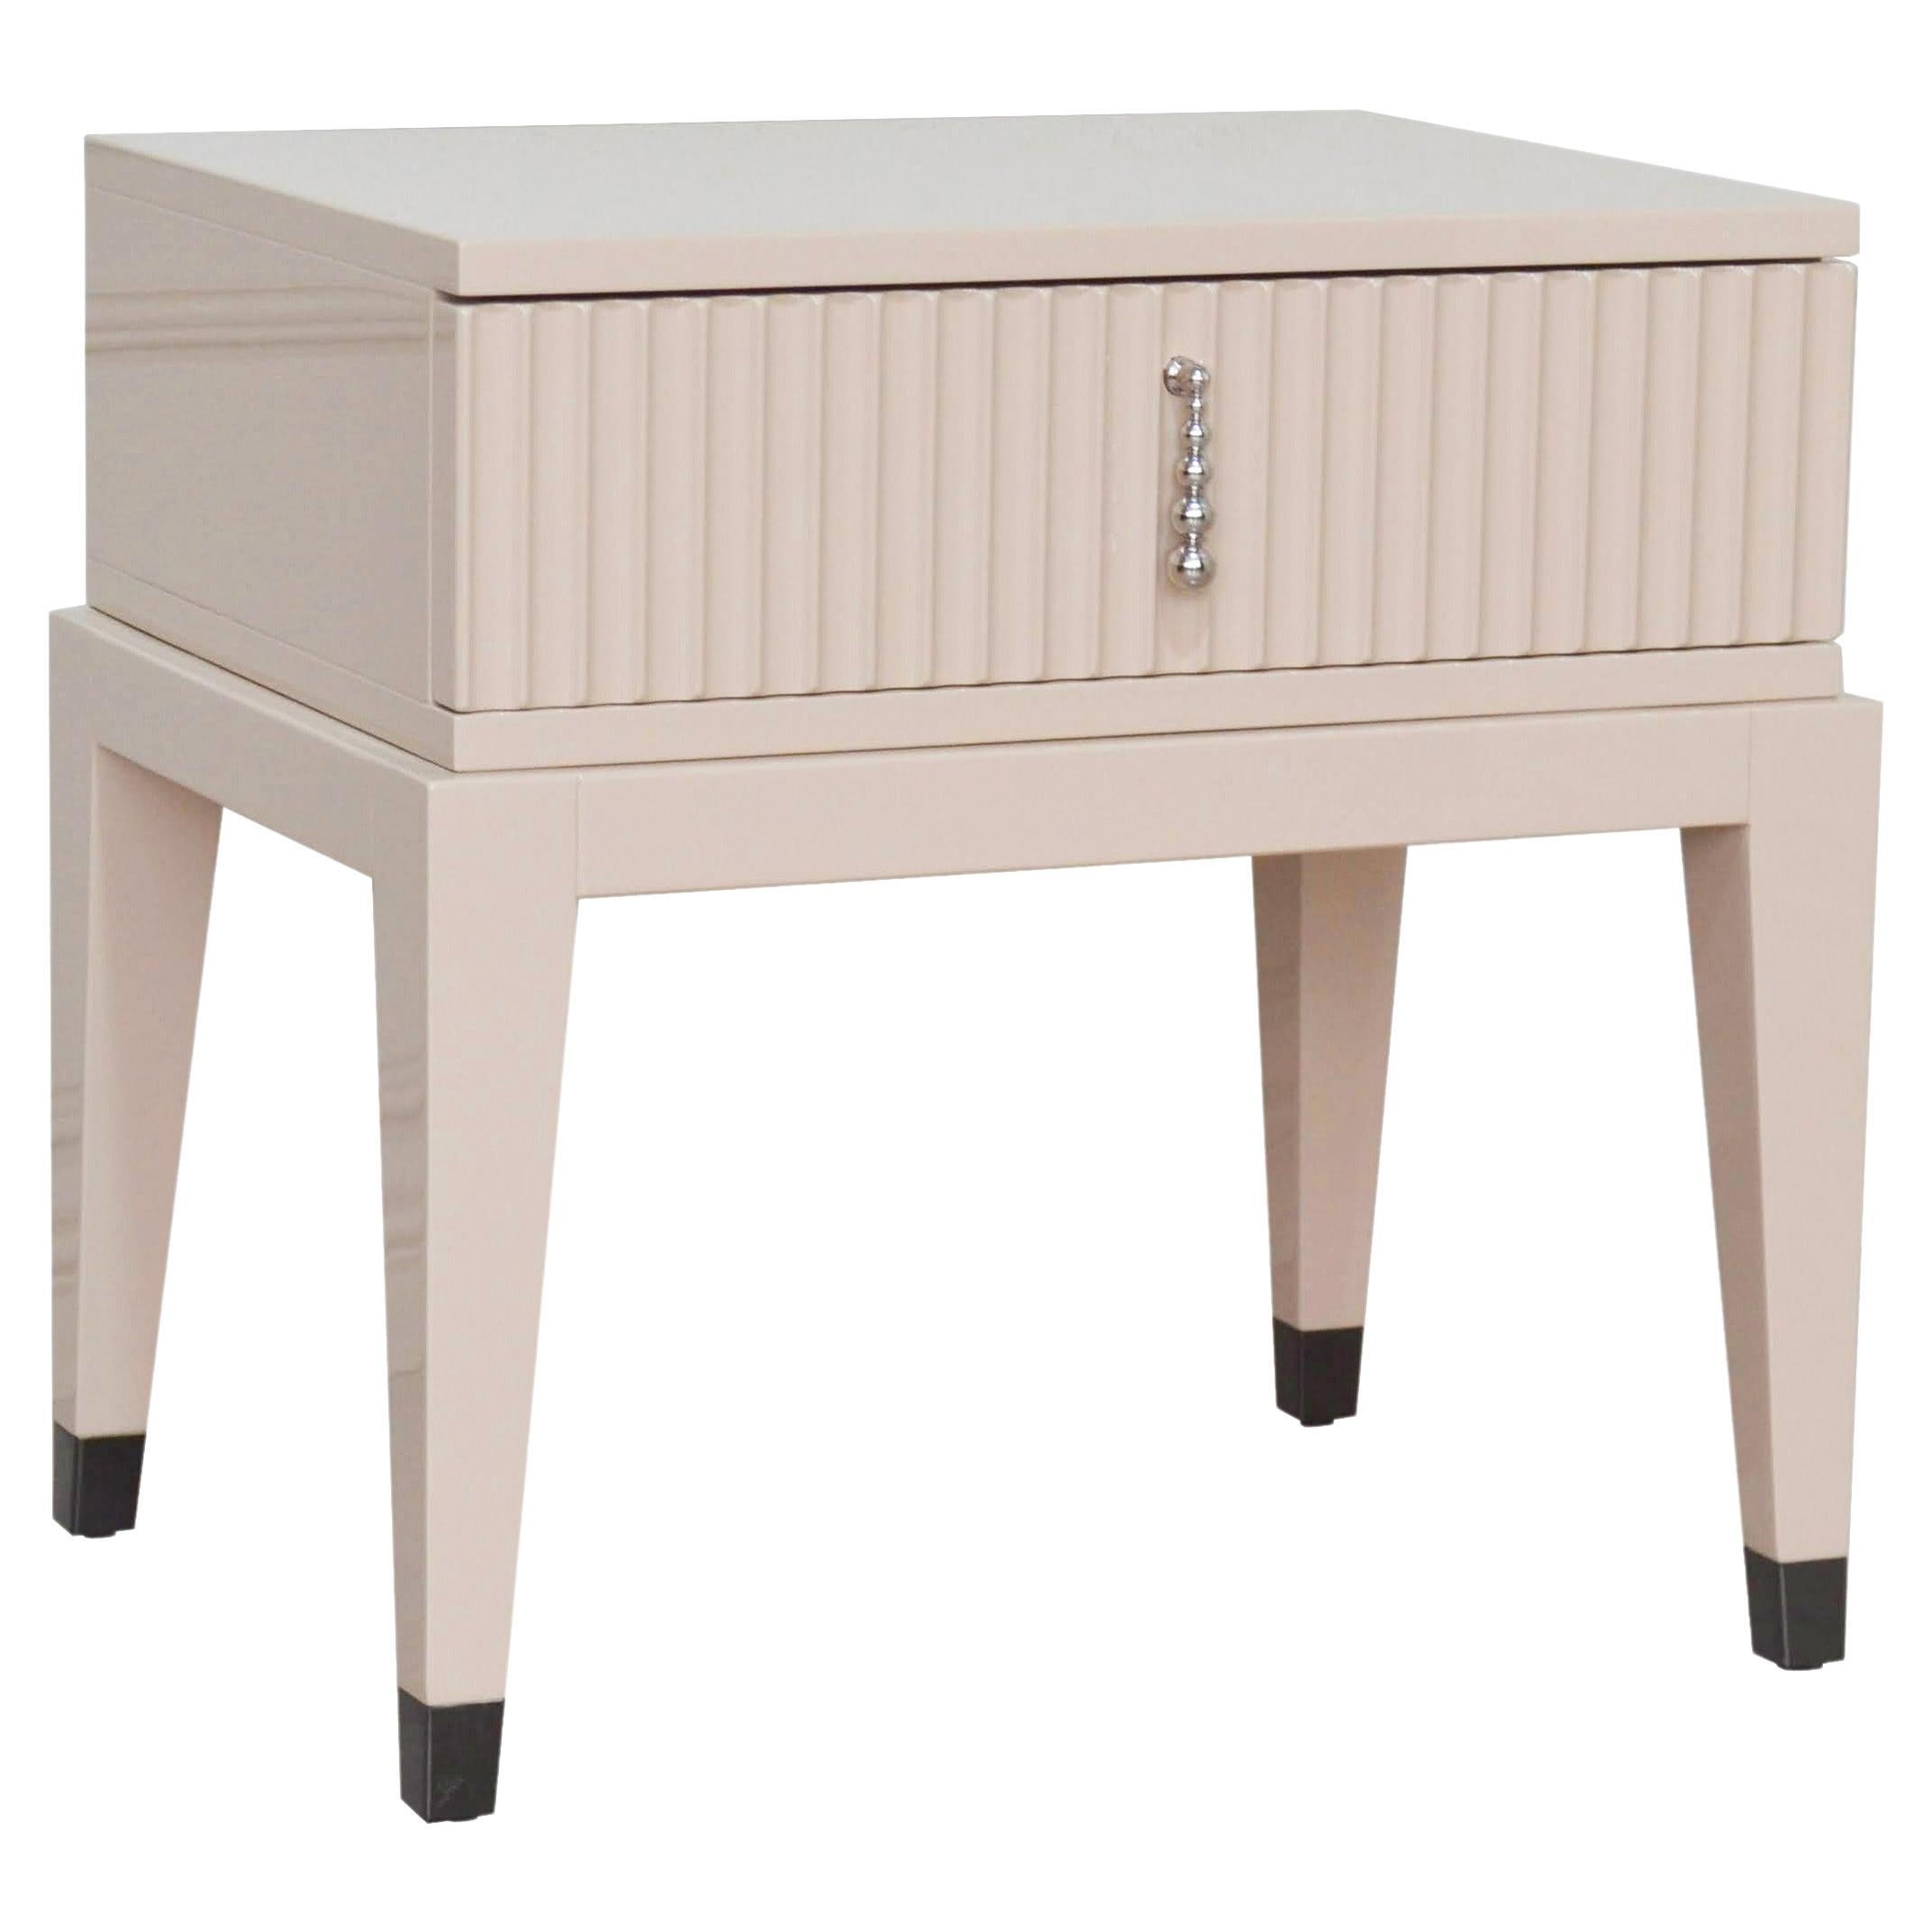 Italian Night Table in Beige/Cappuccino High Gloss Laquered Finish with Drawer For Sale